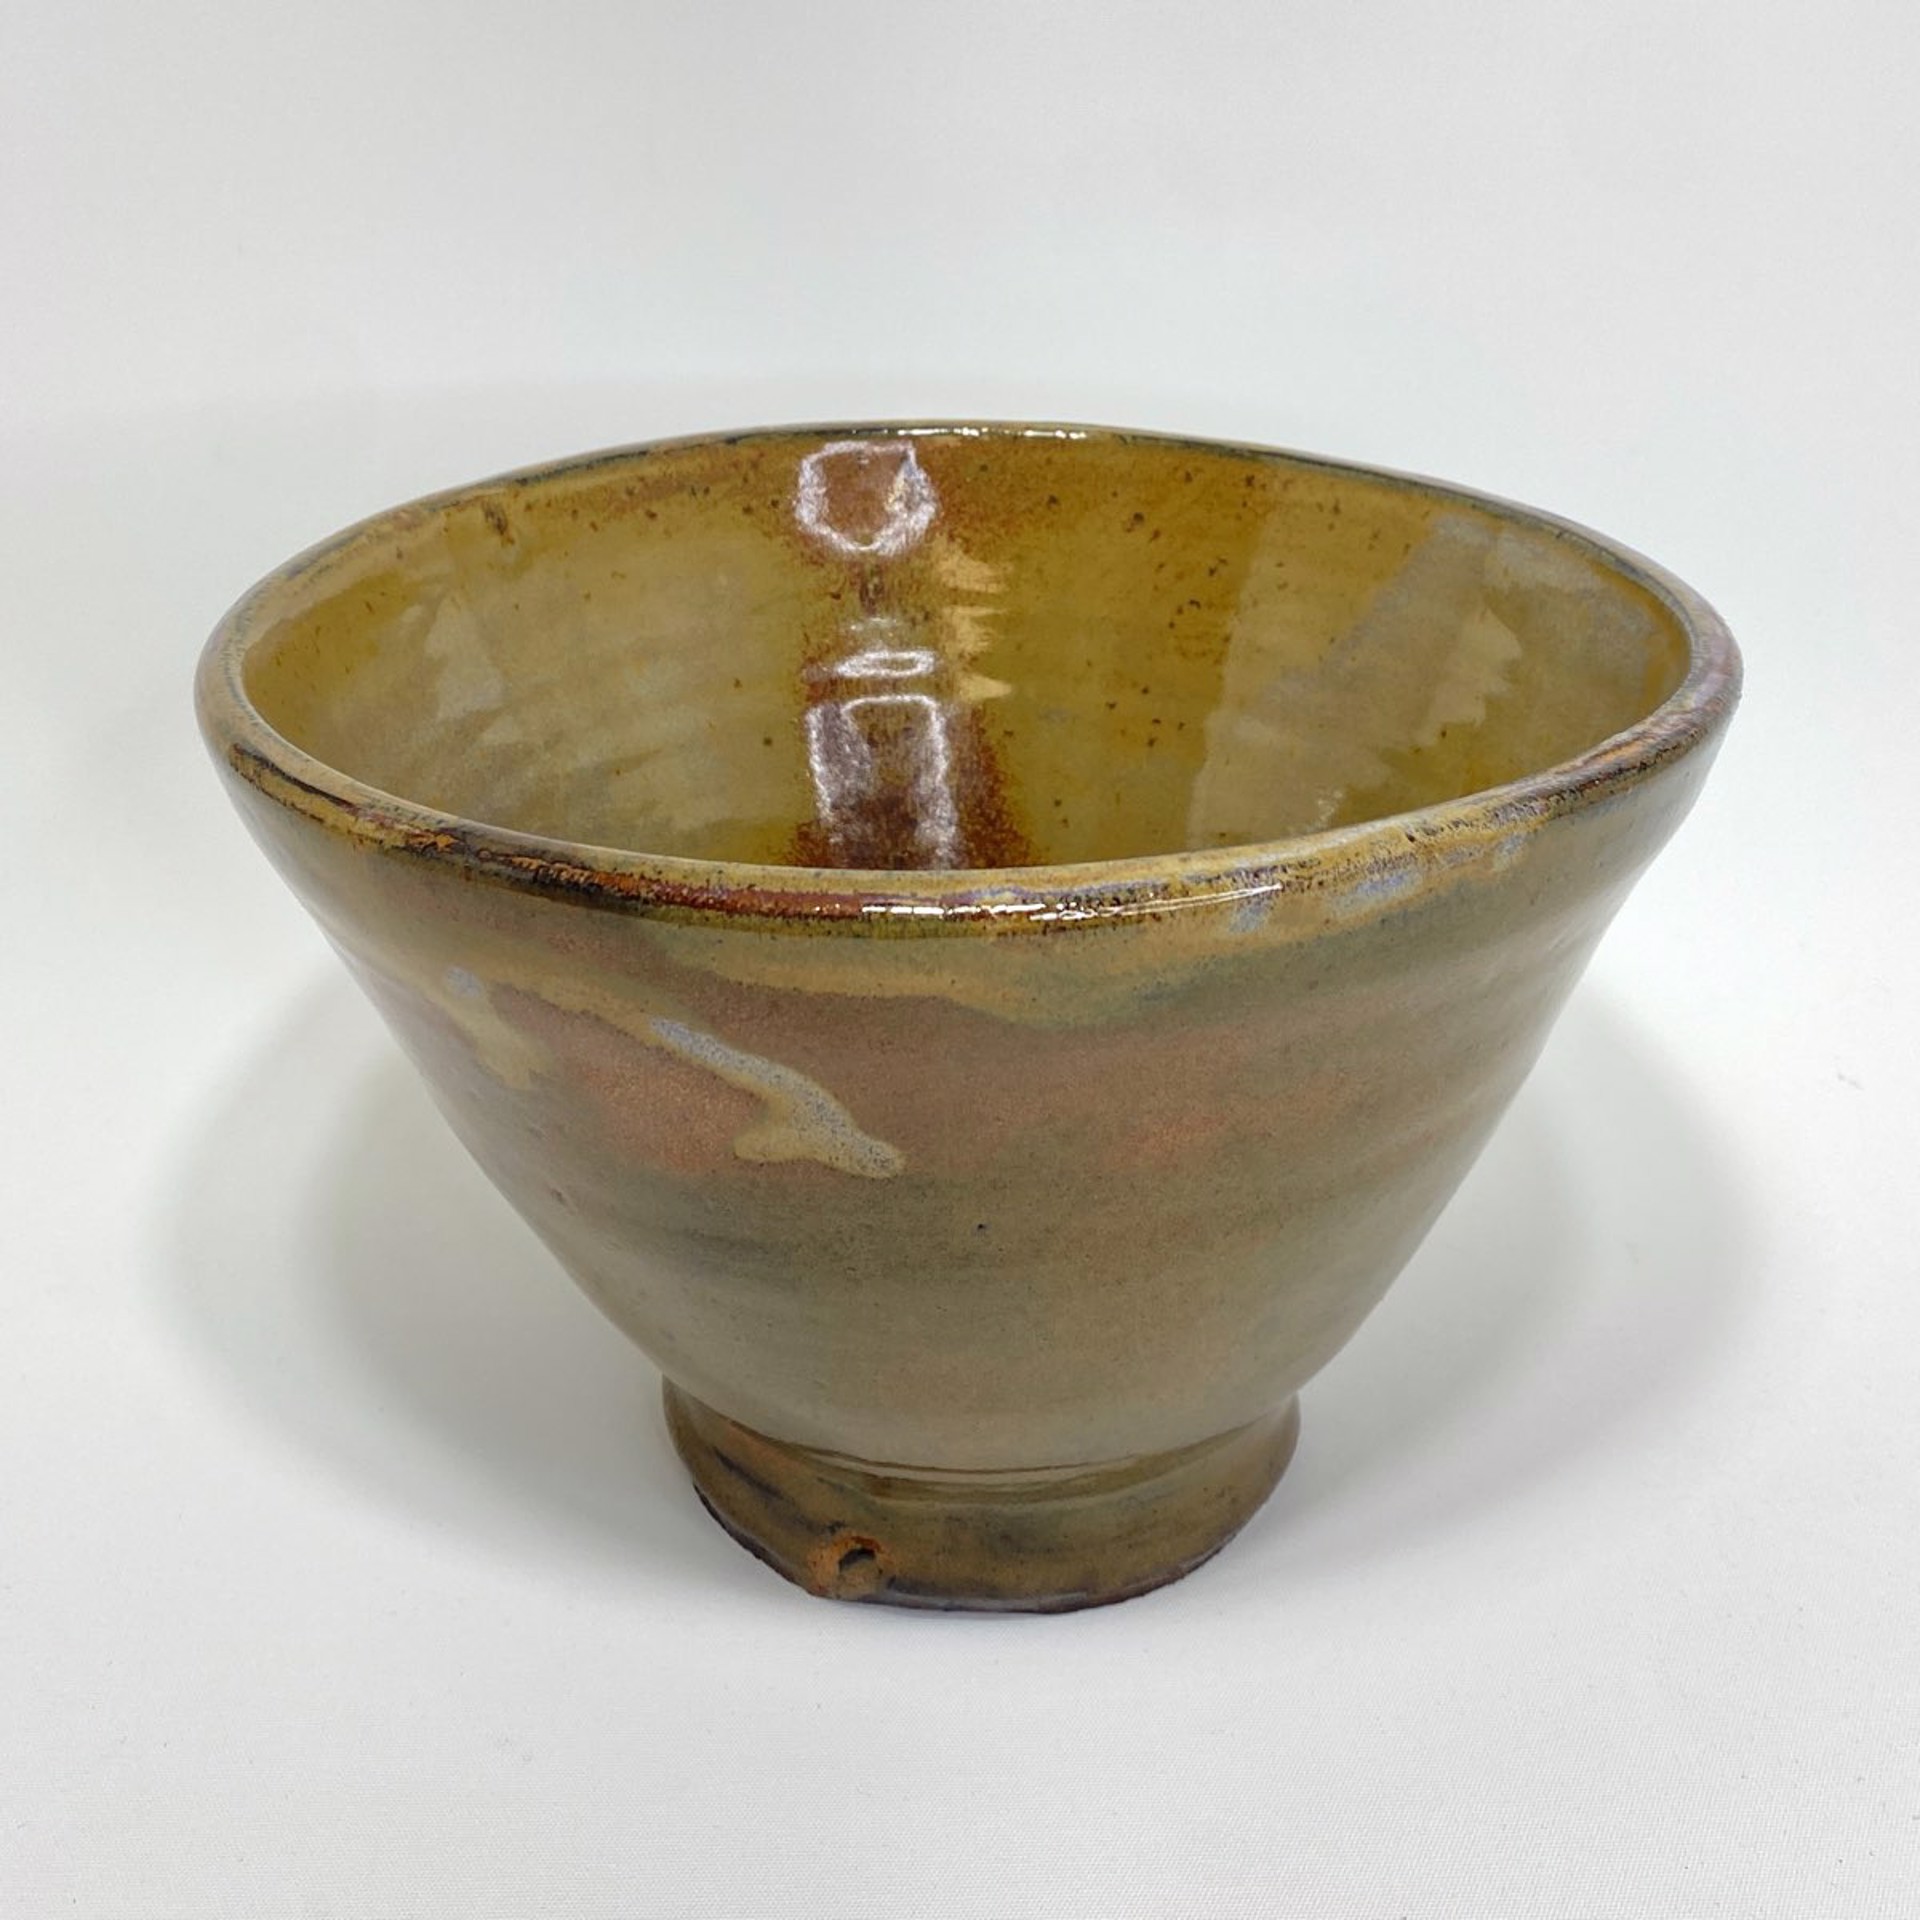 "Earth Tone Bowl" by Justin S. by One Step Beyond Group